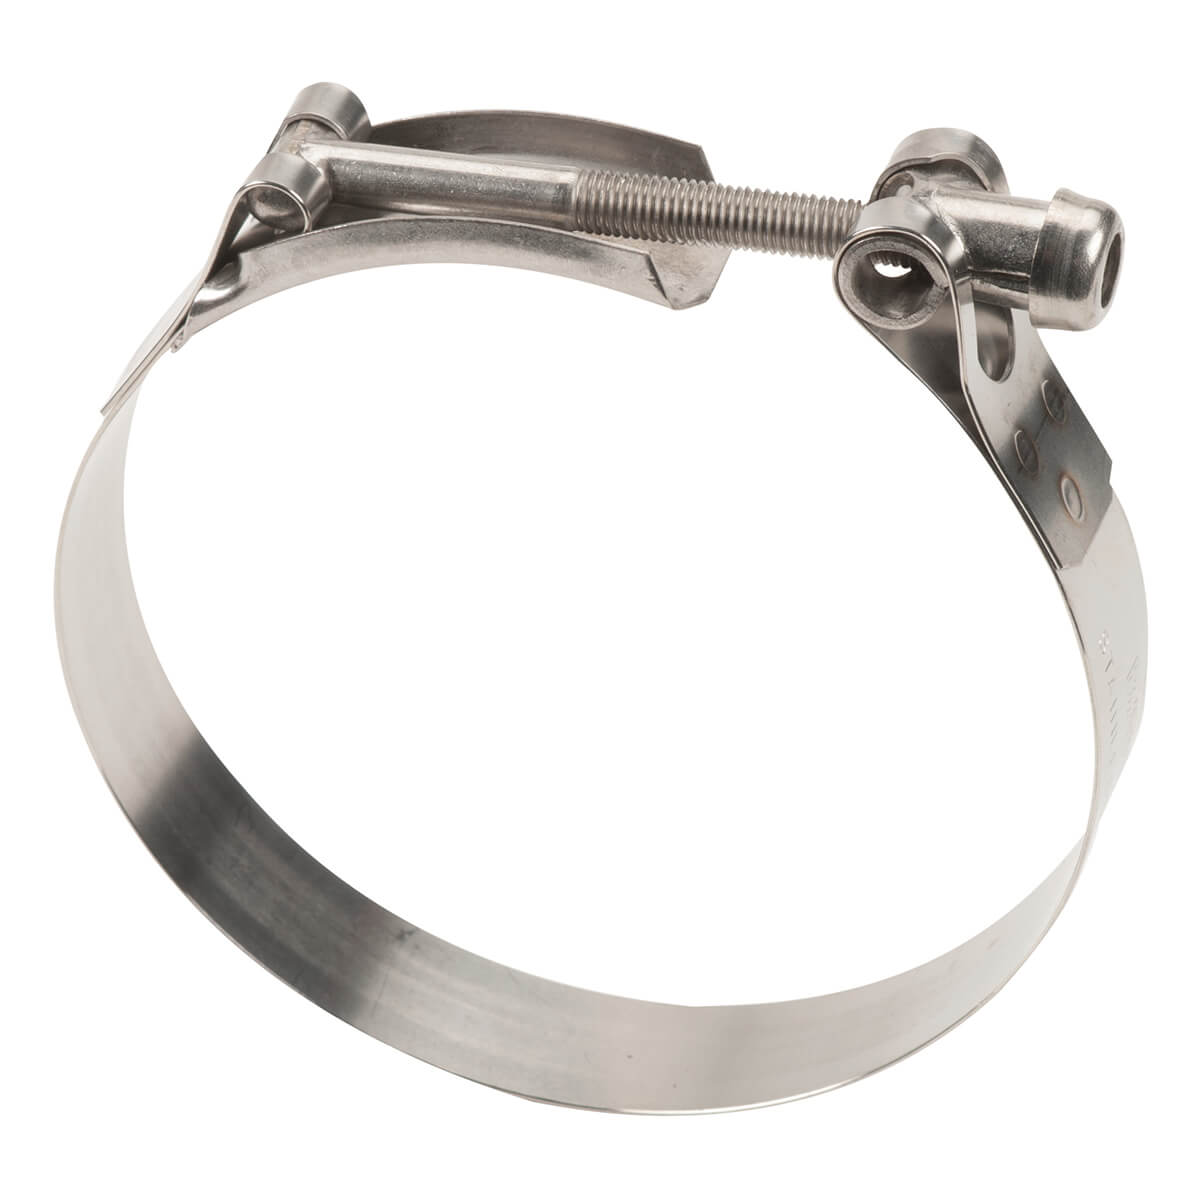 T-Bolt Hose Clamp - 3-in